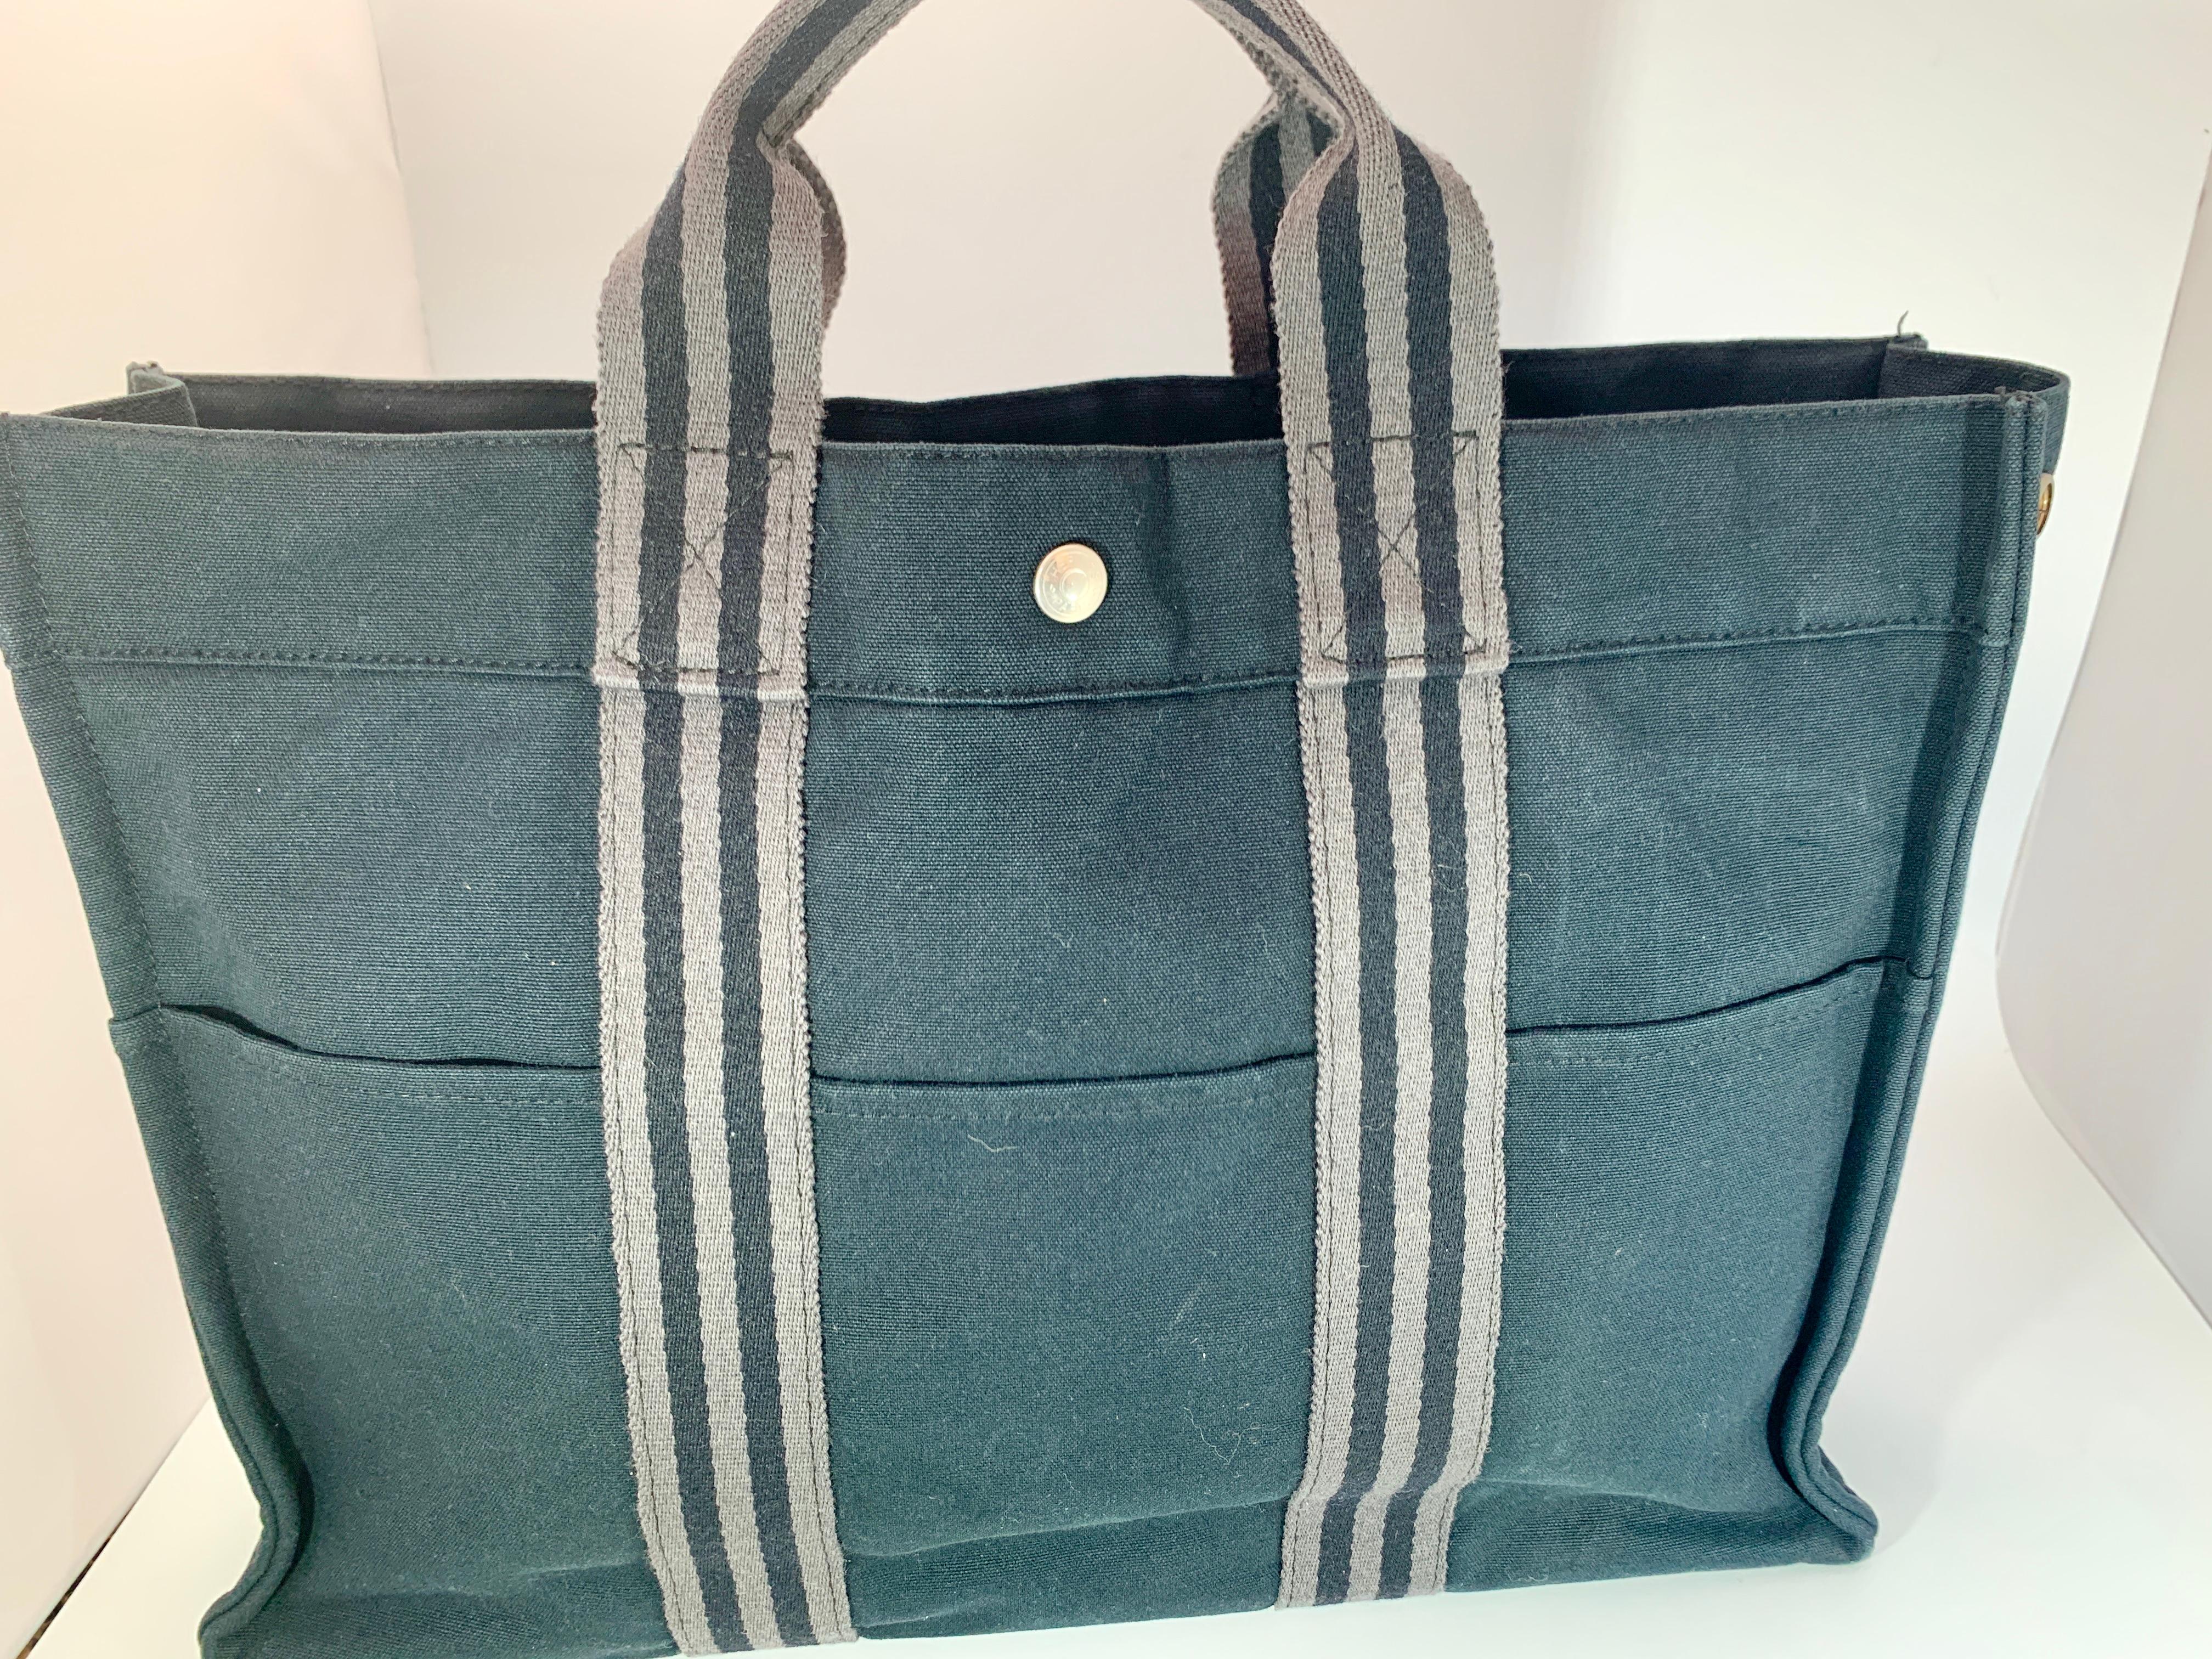 Women's  HERMES Grey/Black Canvas Fourre Tout MM Tote Bag, like new